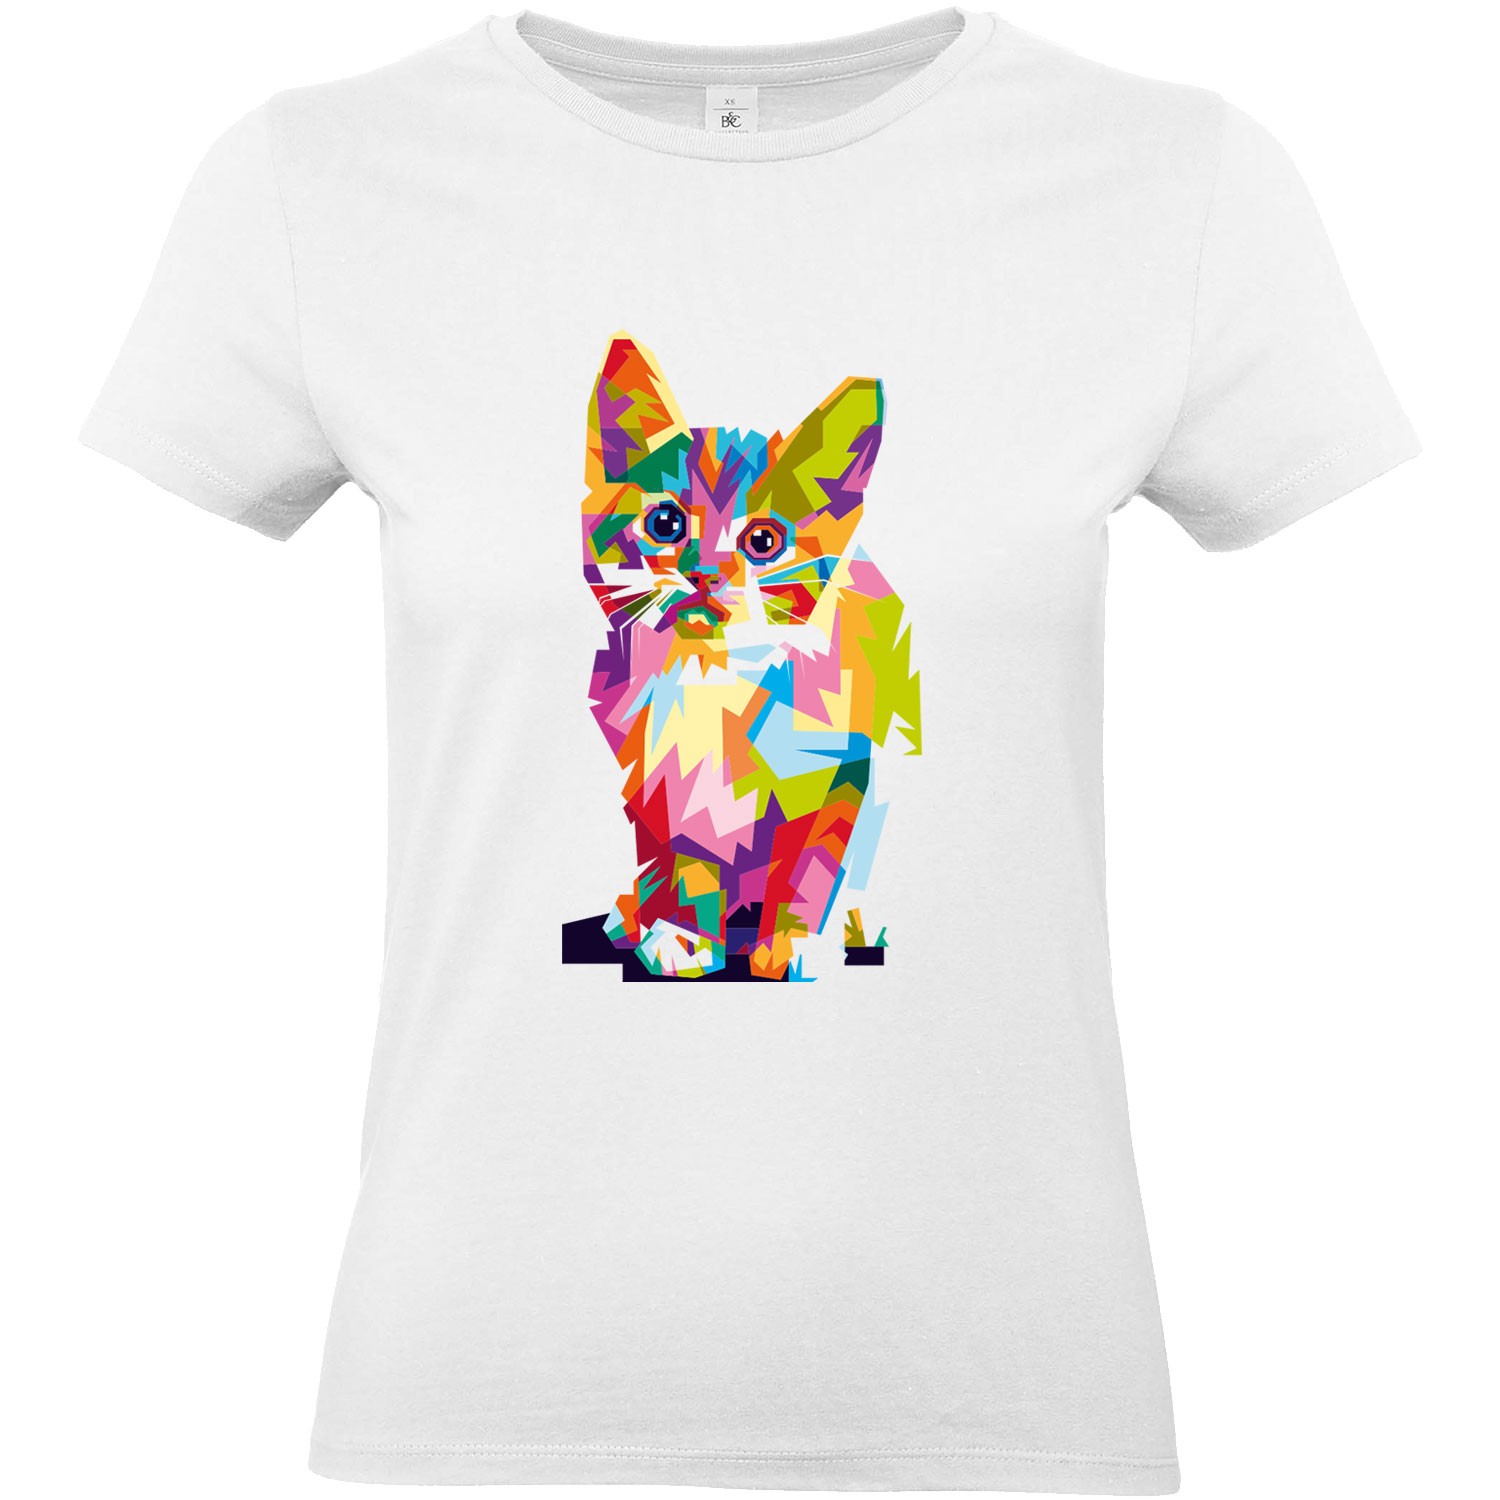 T Shirt Femme Pop Art Bebe Chat Graphique Animaux Geometrique Chaton Abstract Colorful T Shirt Manches Courtes Col Rond Kreamode